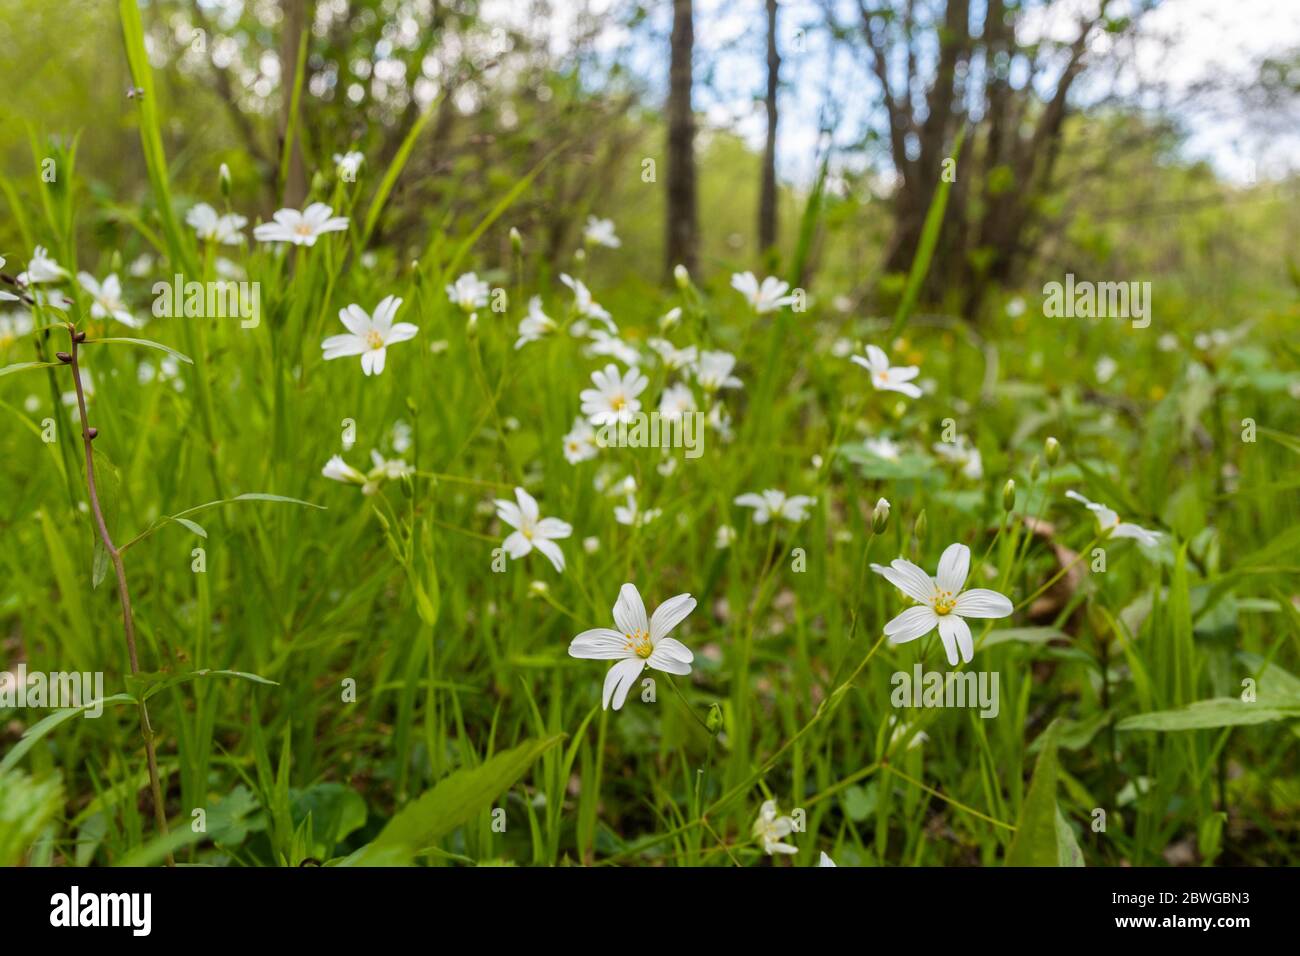 Beautiful Starwort flowers in a bright green image Stock Photo